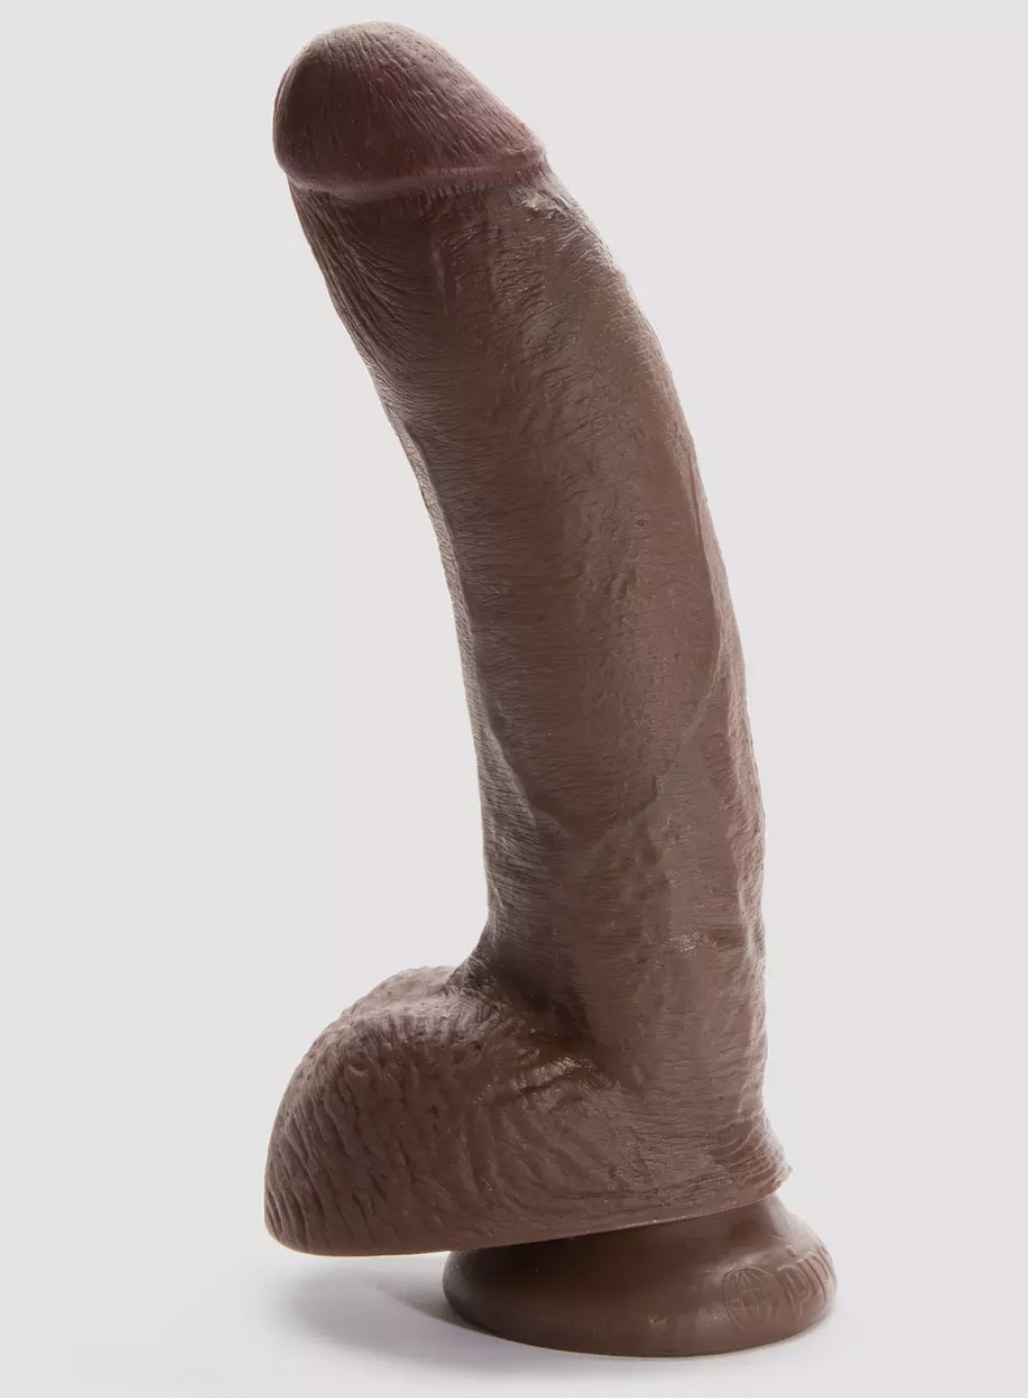 The darker brown realistic dildo with balls and suction cup at the base